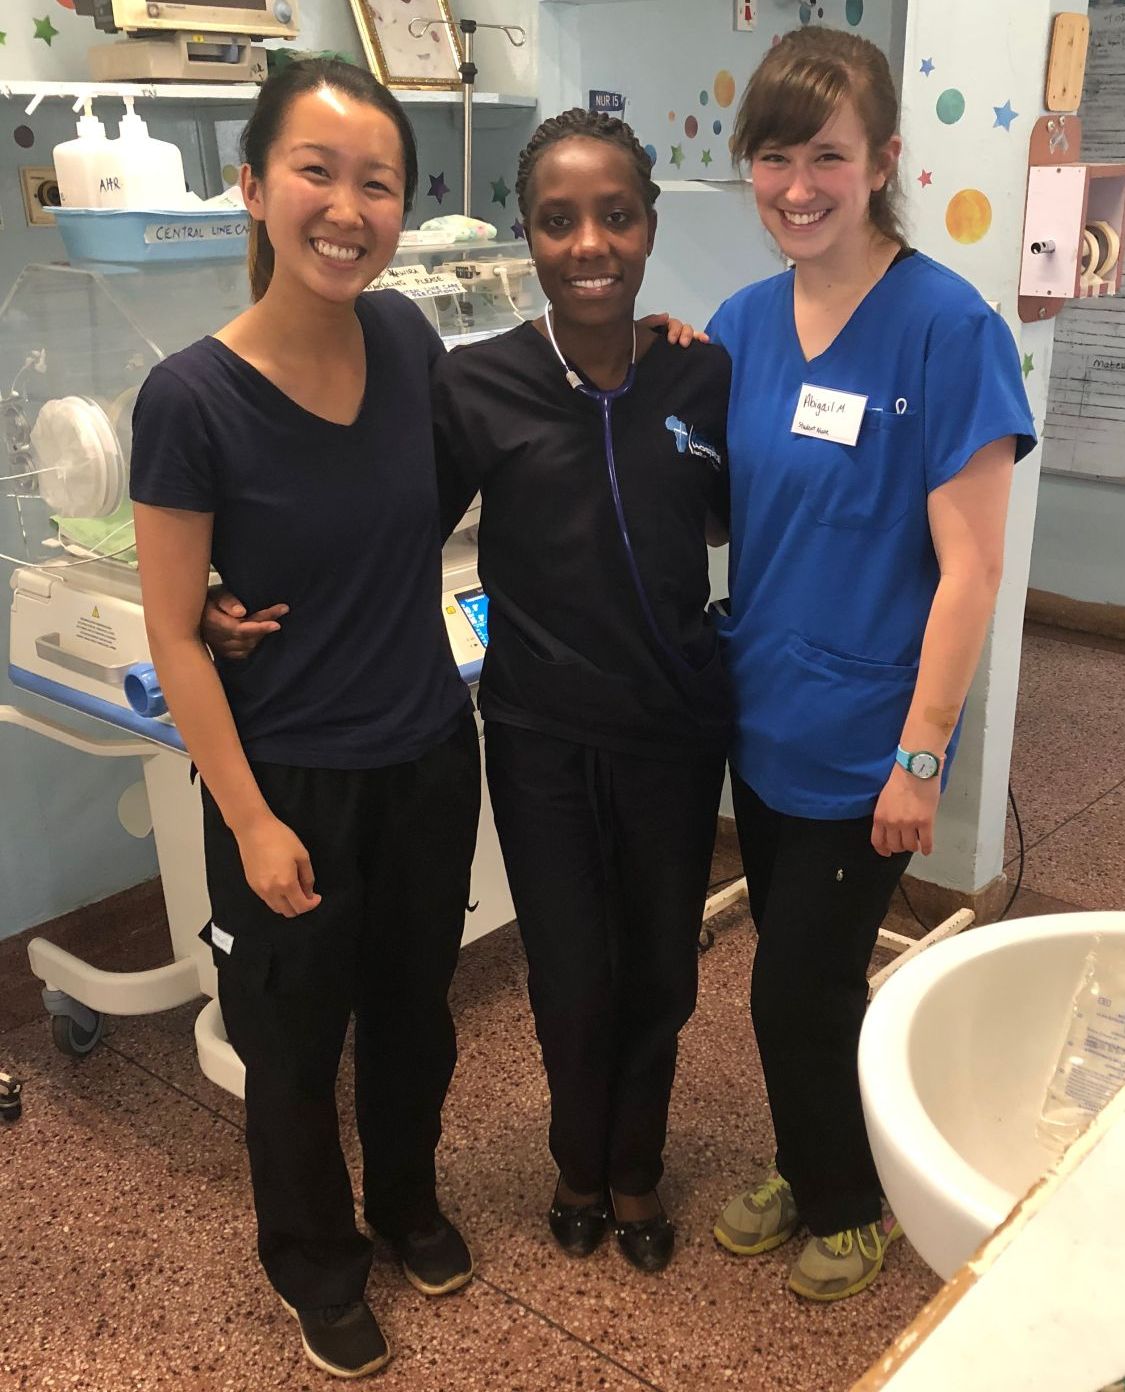 University of Calgary medical student Jessica Tjong (left) served with World Medical Mission at Kijabe Hospital in Kenya last summer.